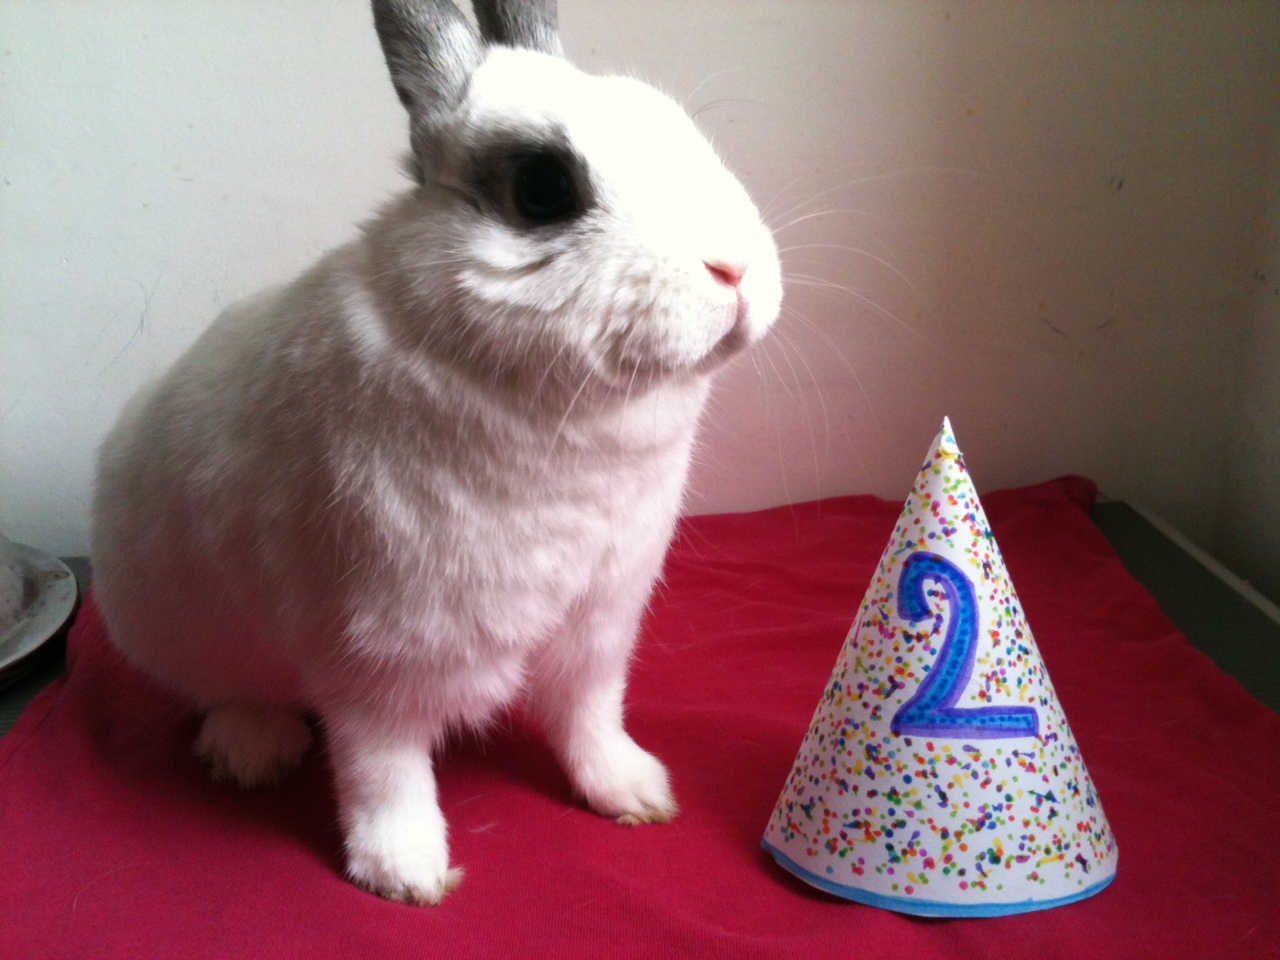 Bunny Gets a Special Birthday Hat Made for Him